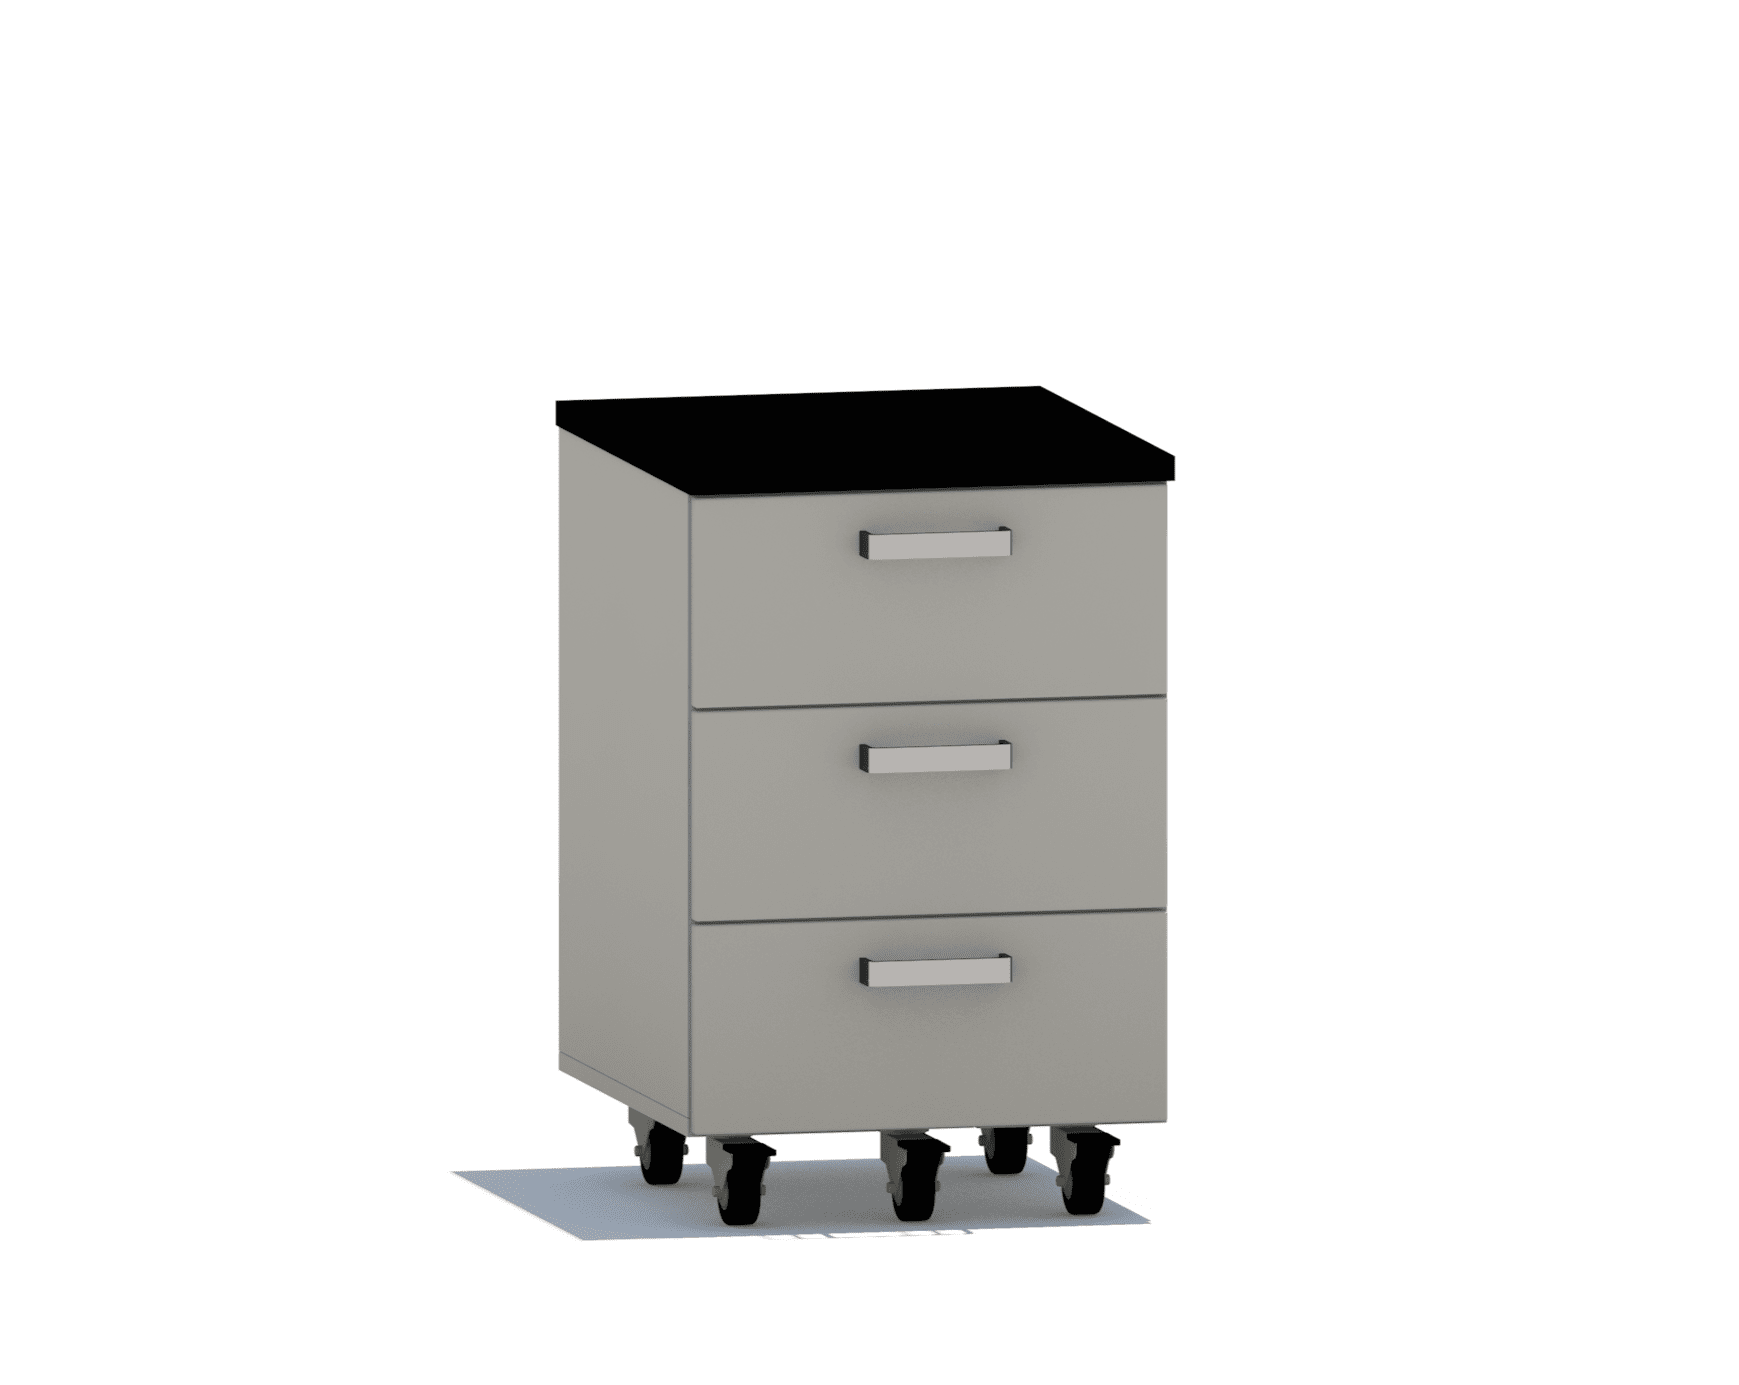 Drawer Storage Unit Workstations omnilabsolutions 20 wide Yes 